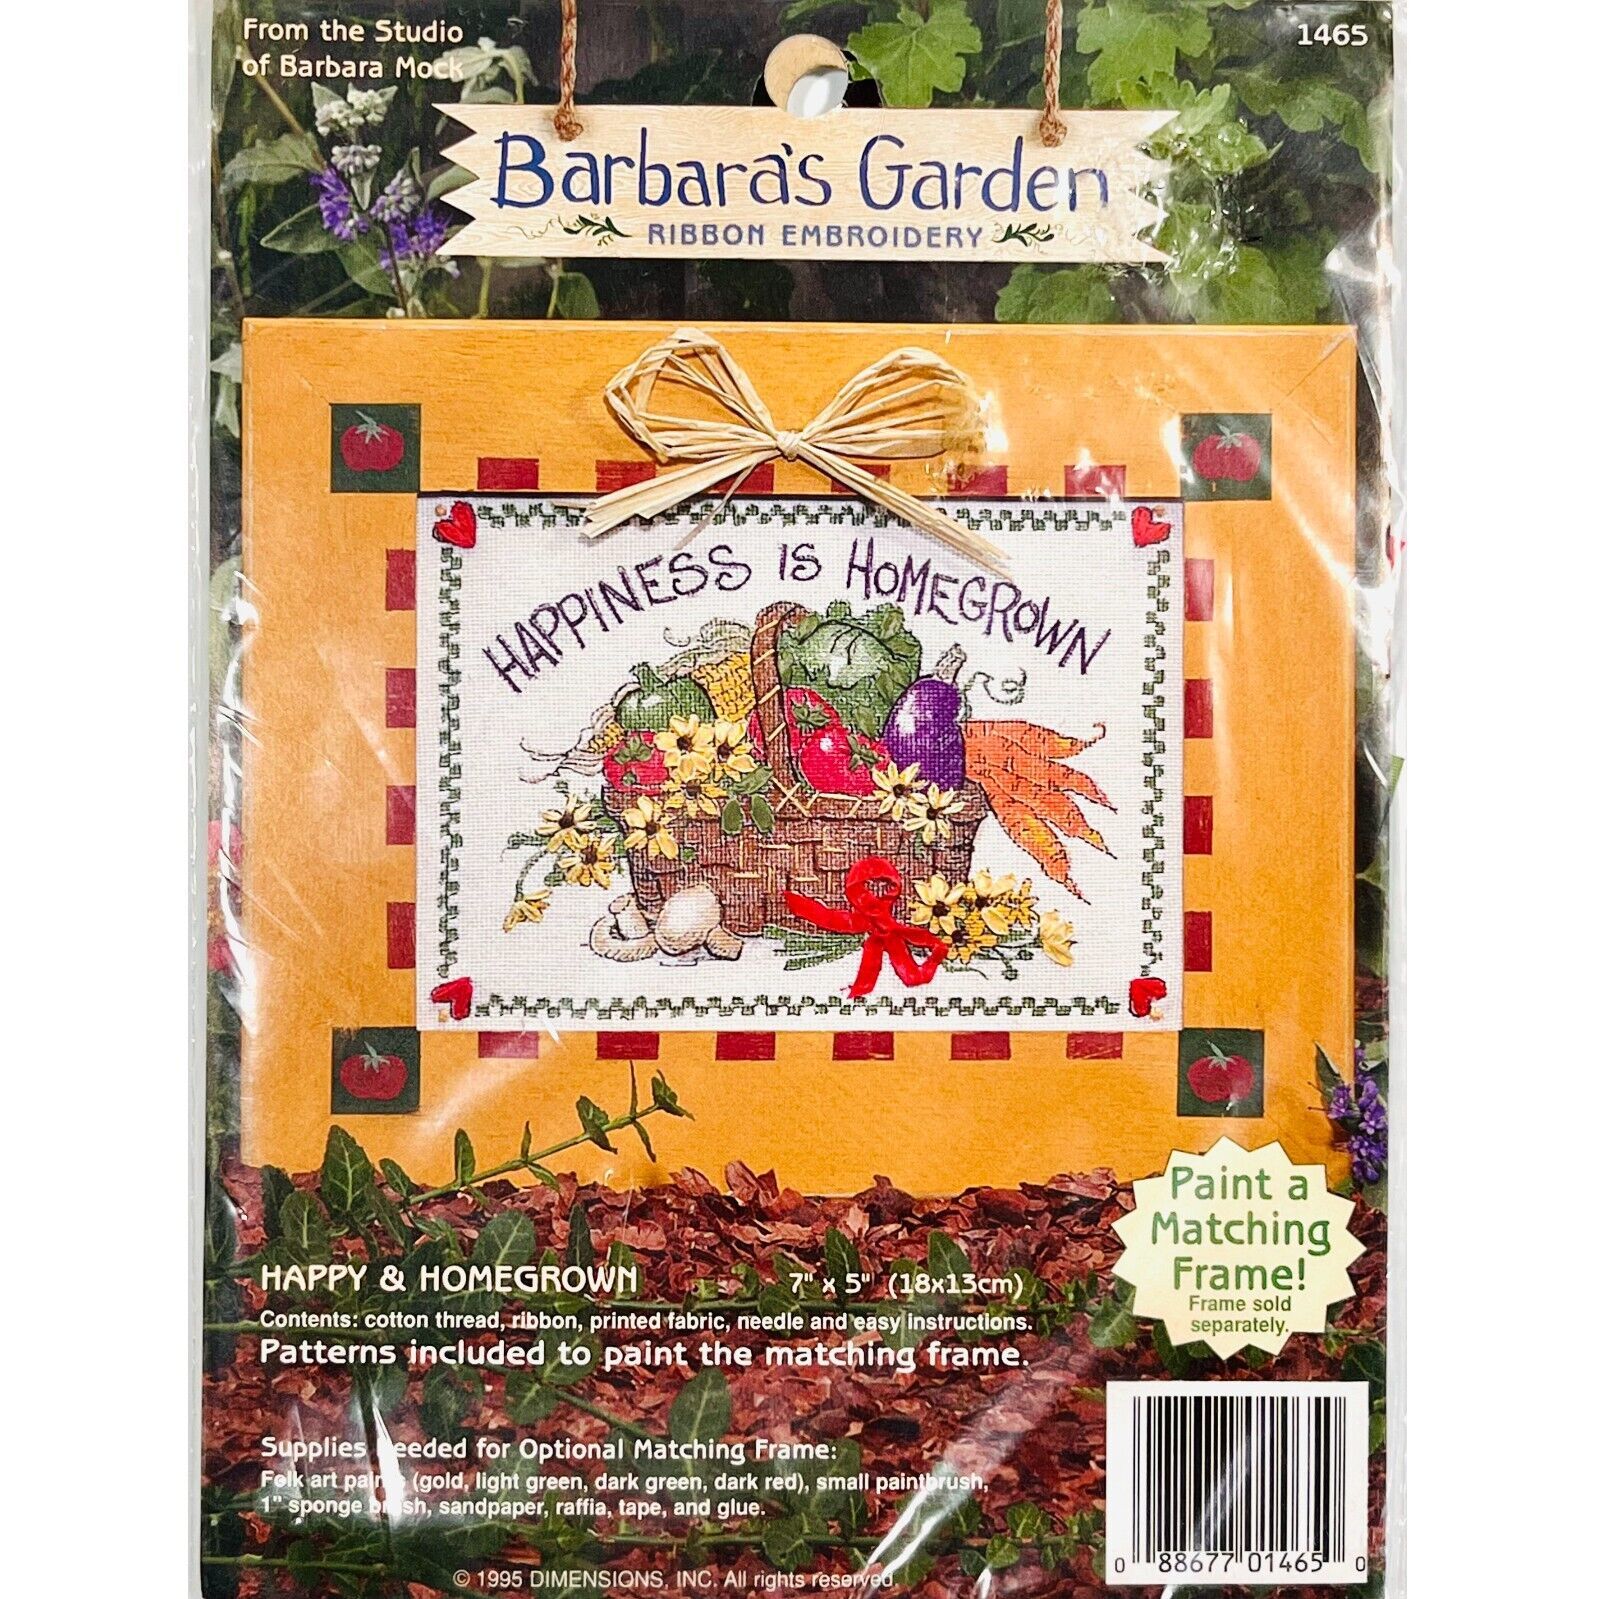 Happy and Homegrown Ribbon Embroidery Kit 1465 Barbaras Garden by Dimensions - $6.99